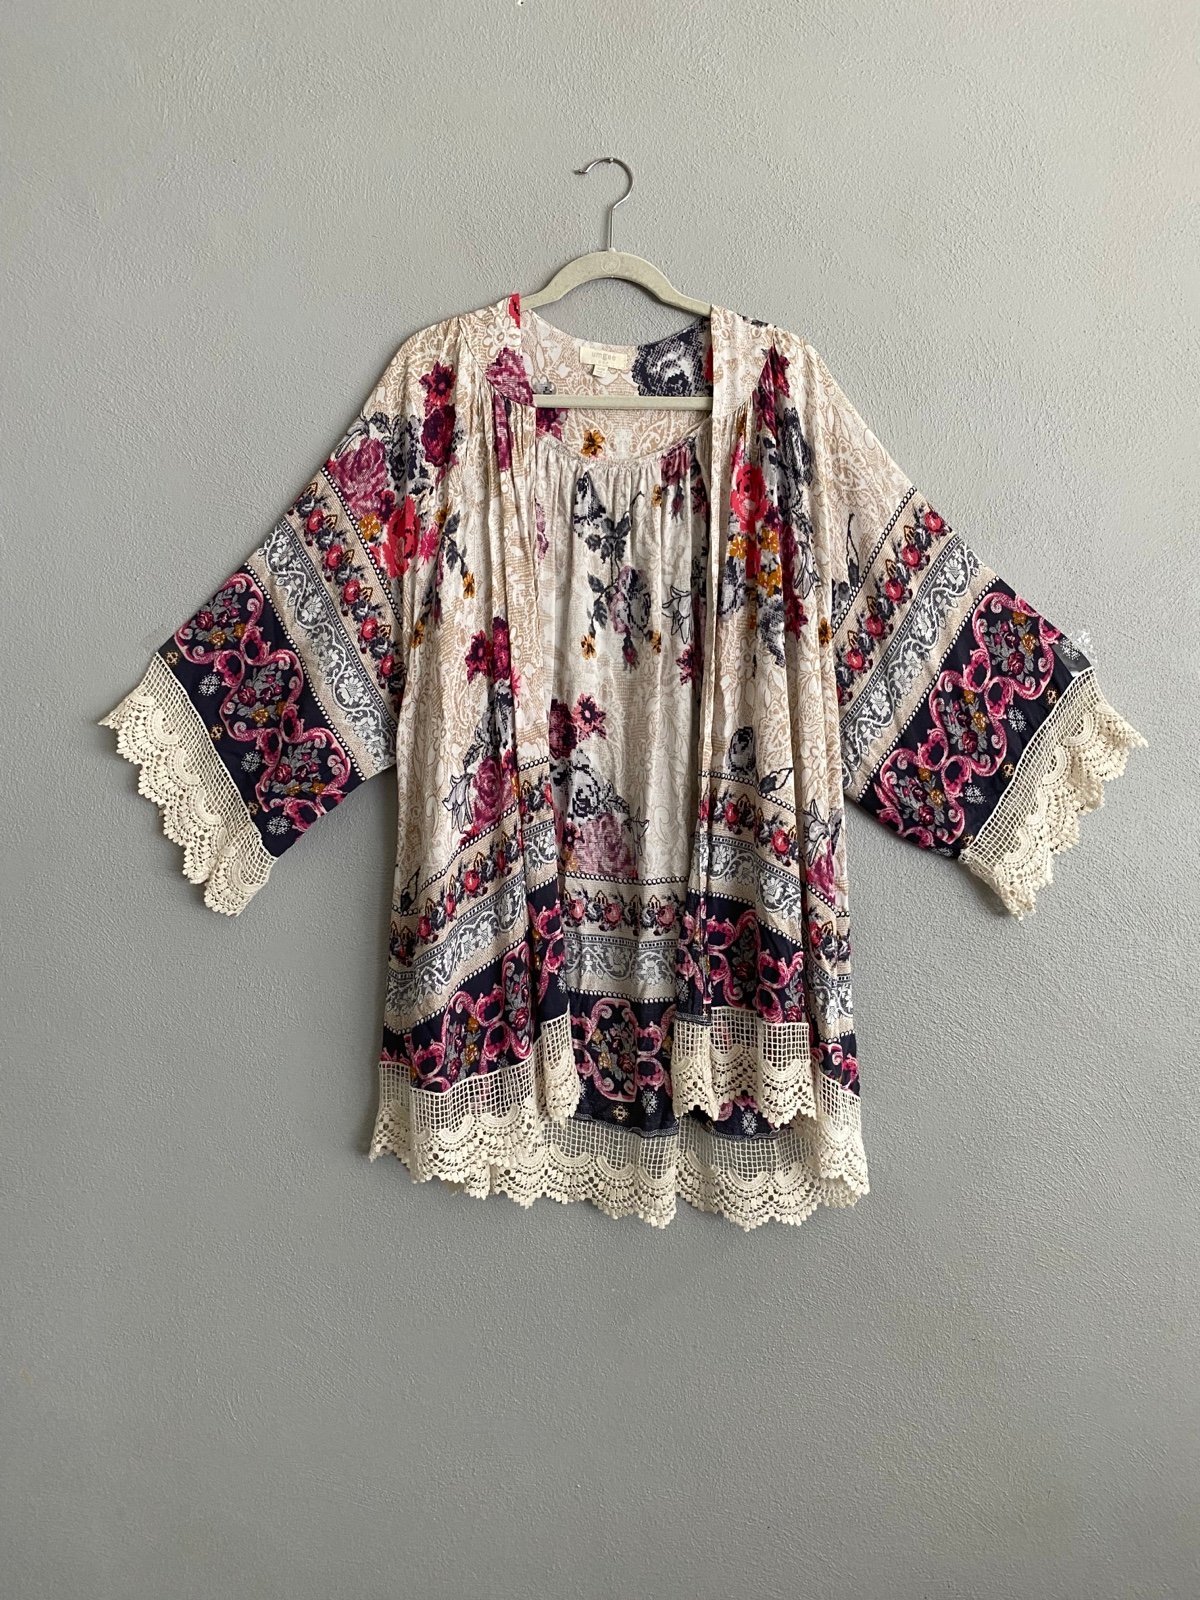 Simple Umgee Floral Mixed Print Multicolor Open Front Kimono Duster Size S/M jngheXX2y Store Online